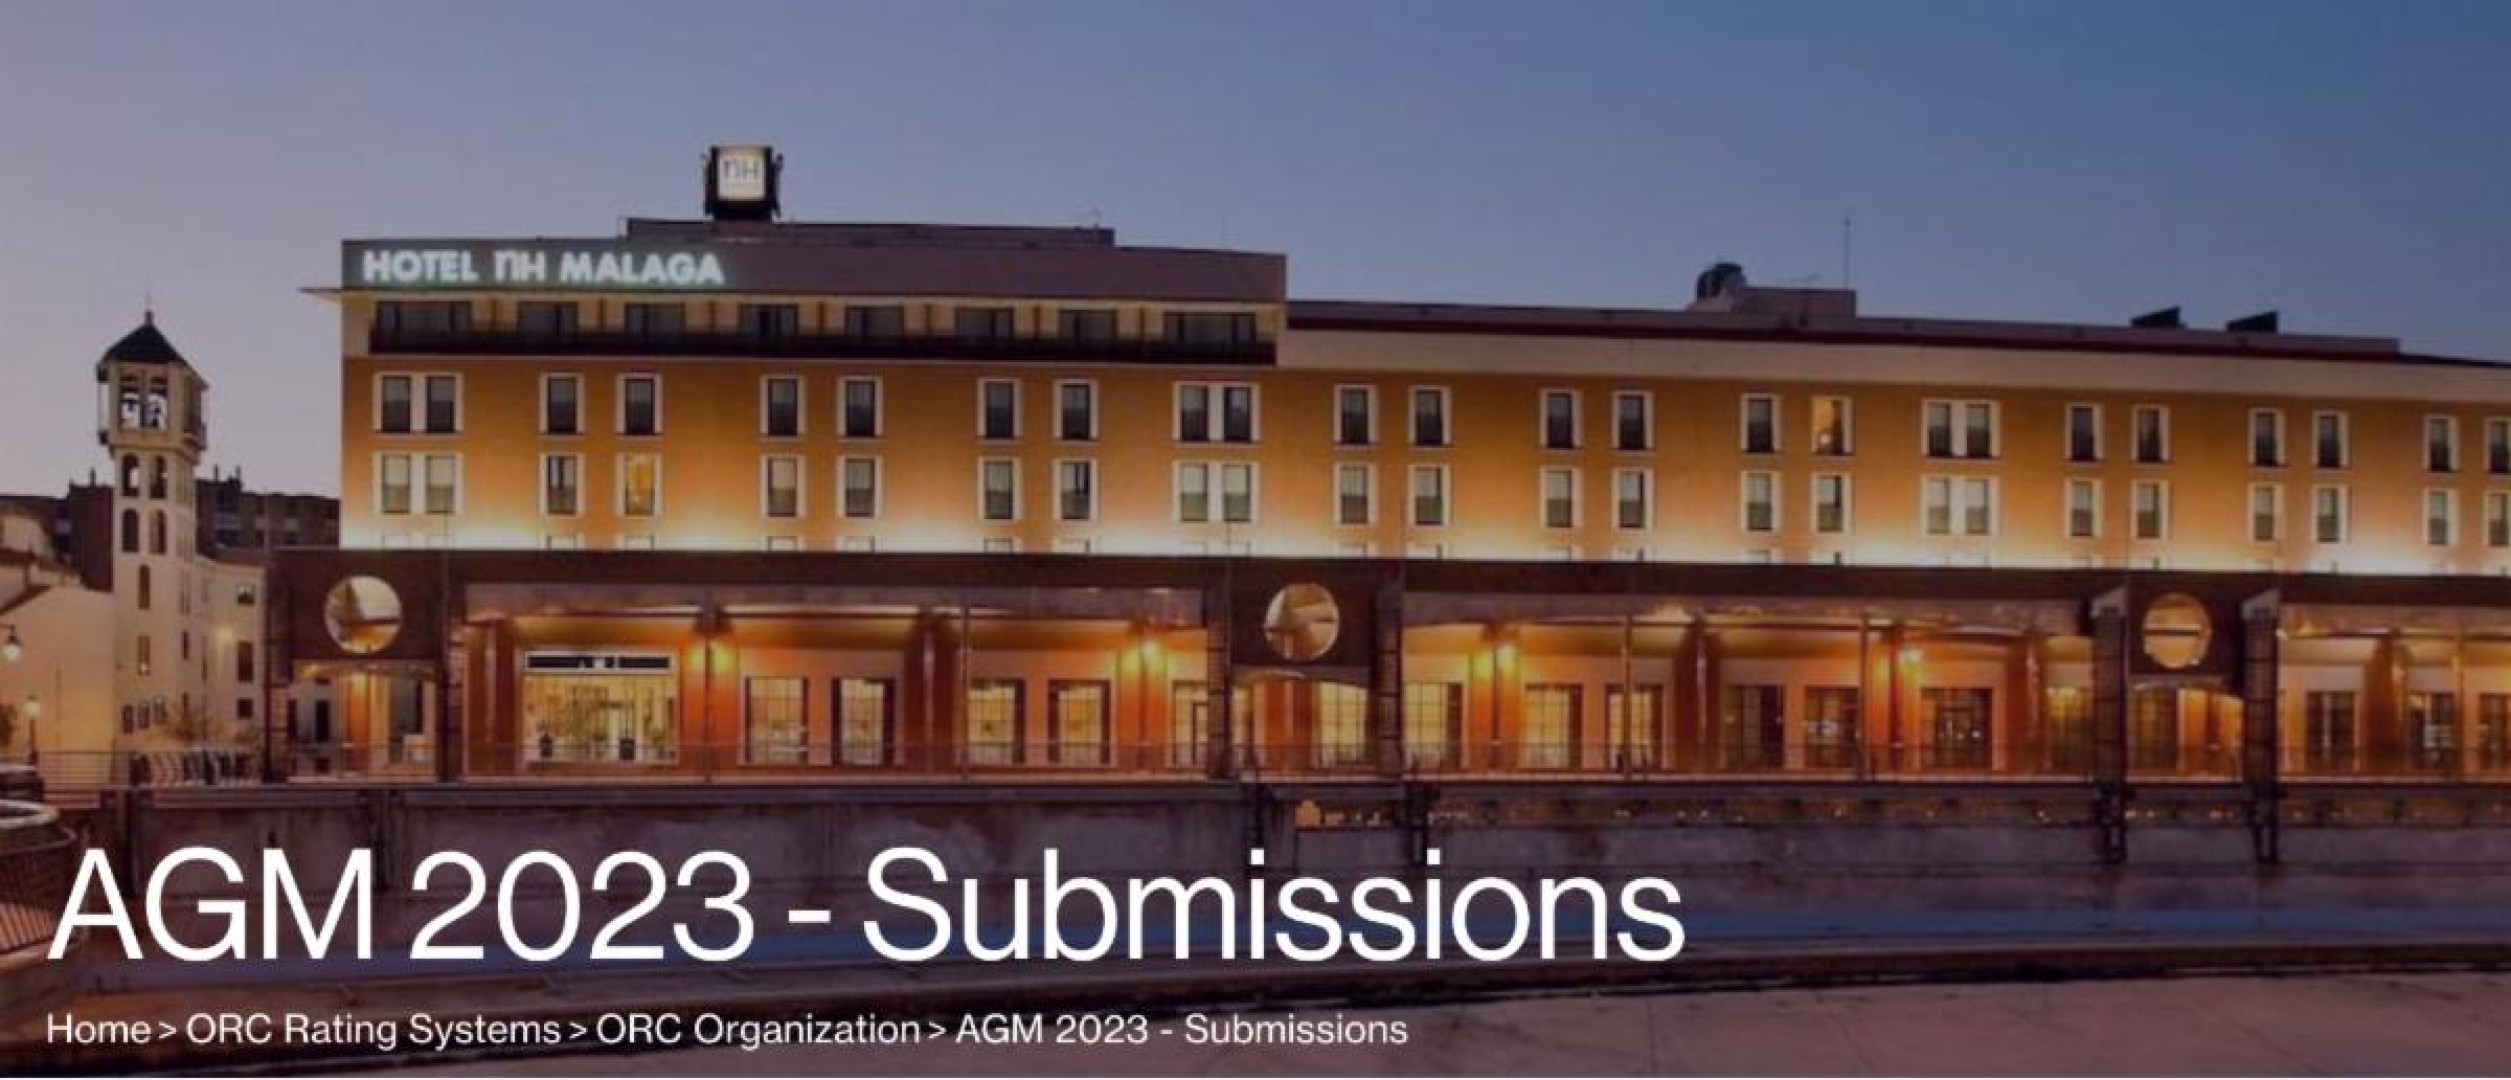 Submissions posted for 2023 ORC Annual Meeting in Malaga